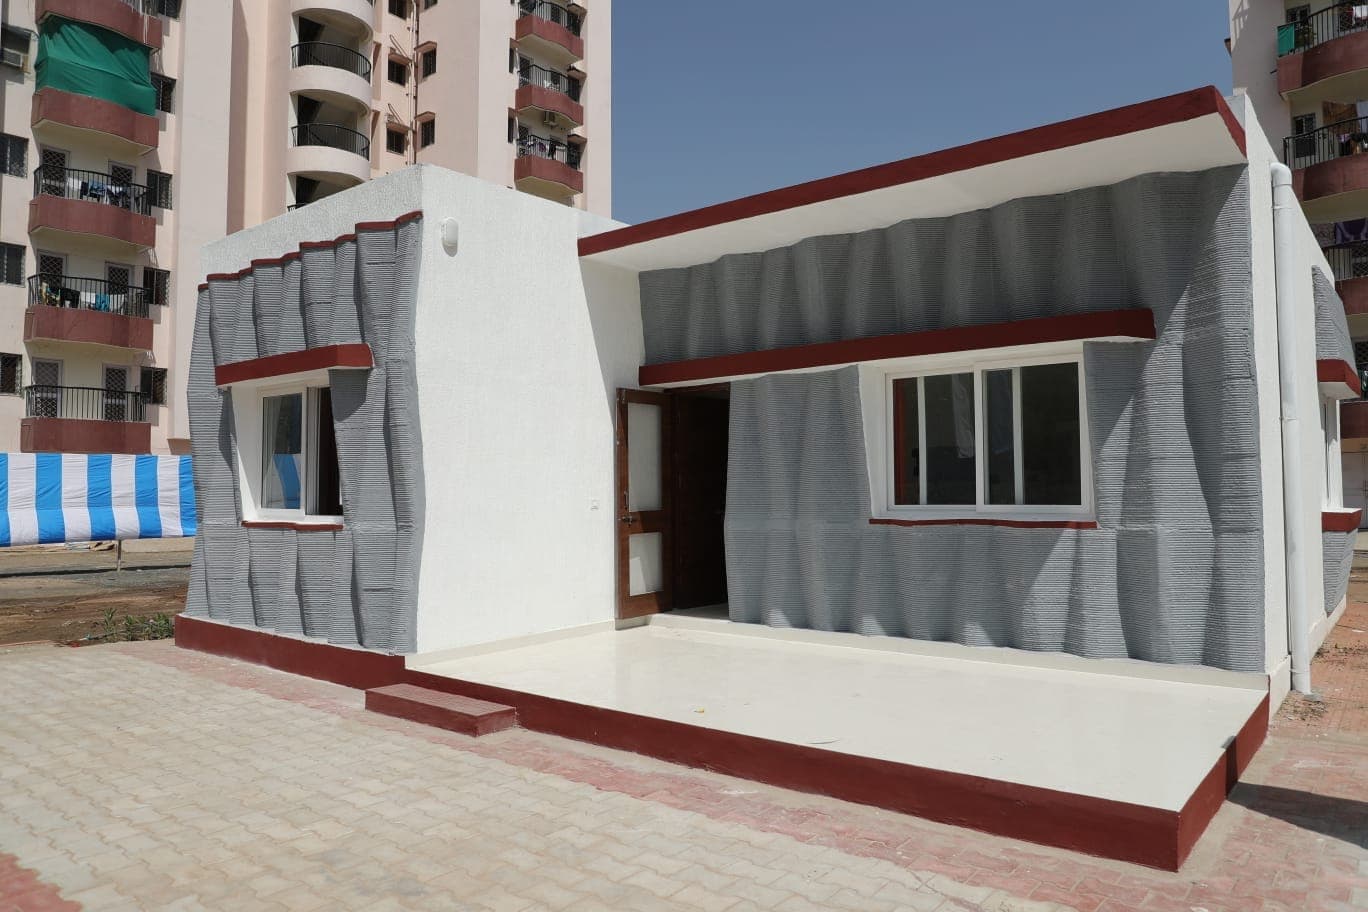 The Indian Army's Military Engineering Services' 3D printed houses. Photo via Hindustan Times.